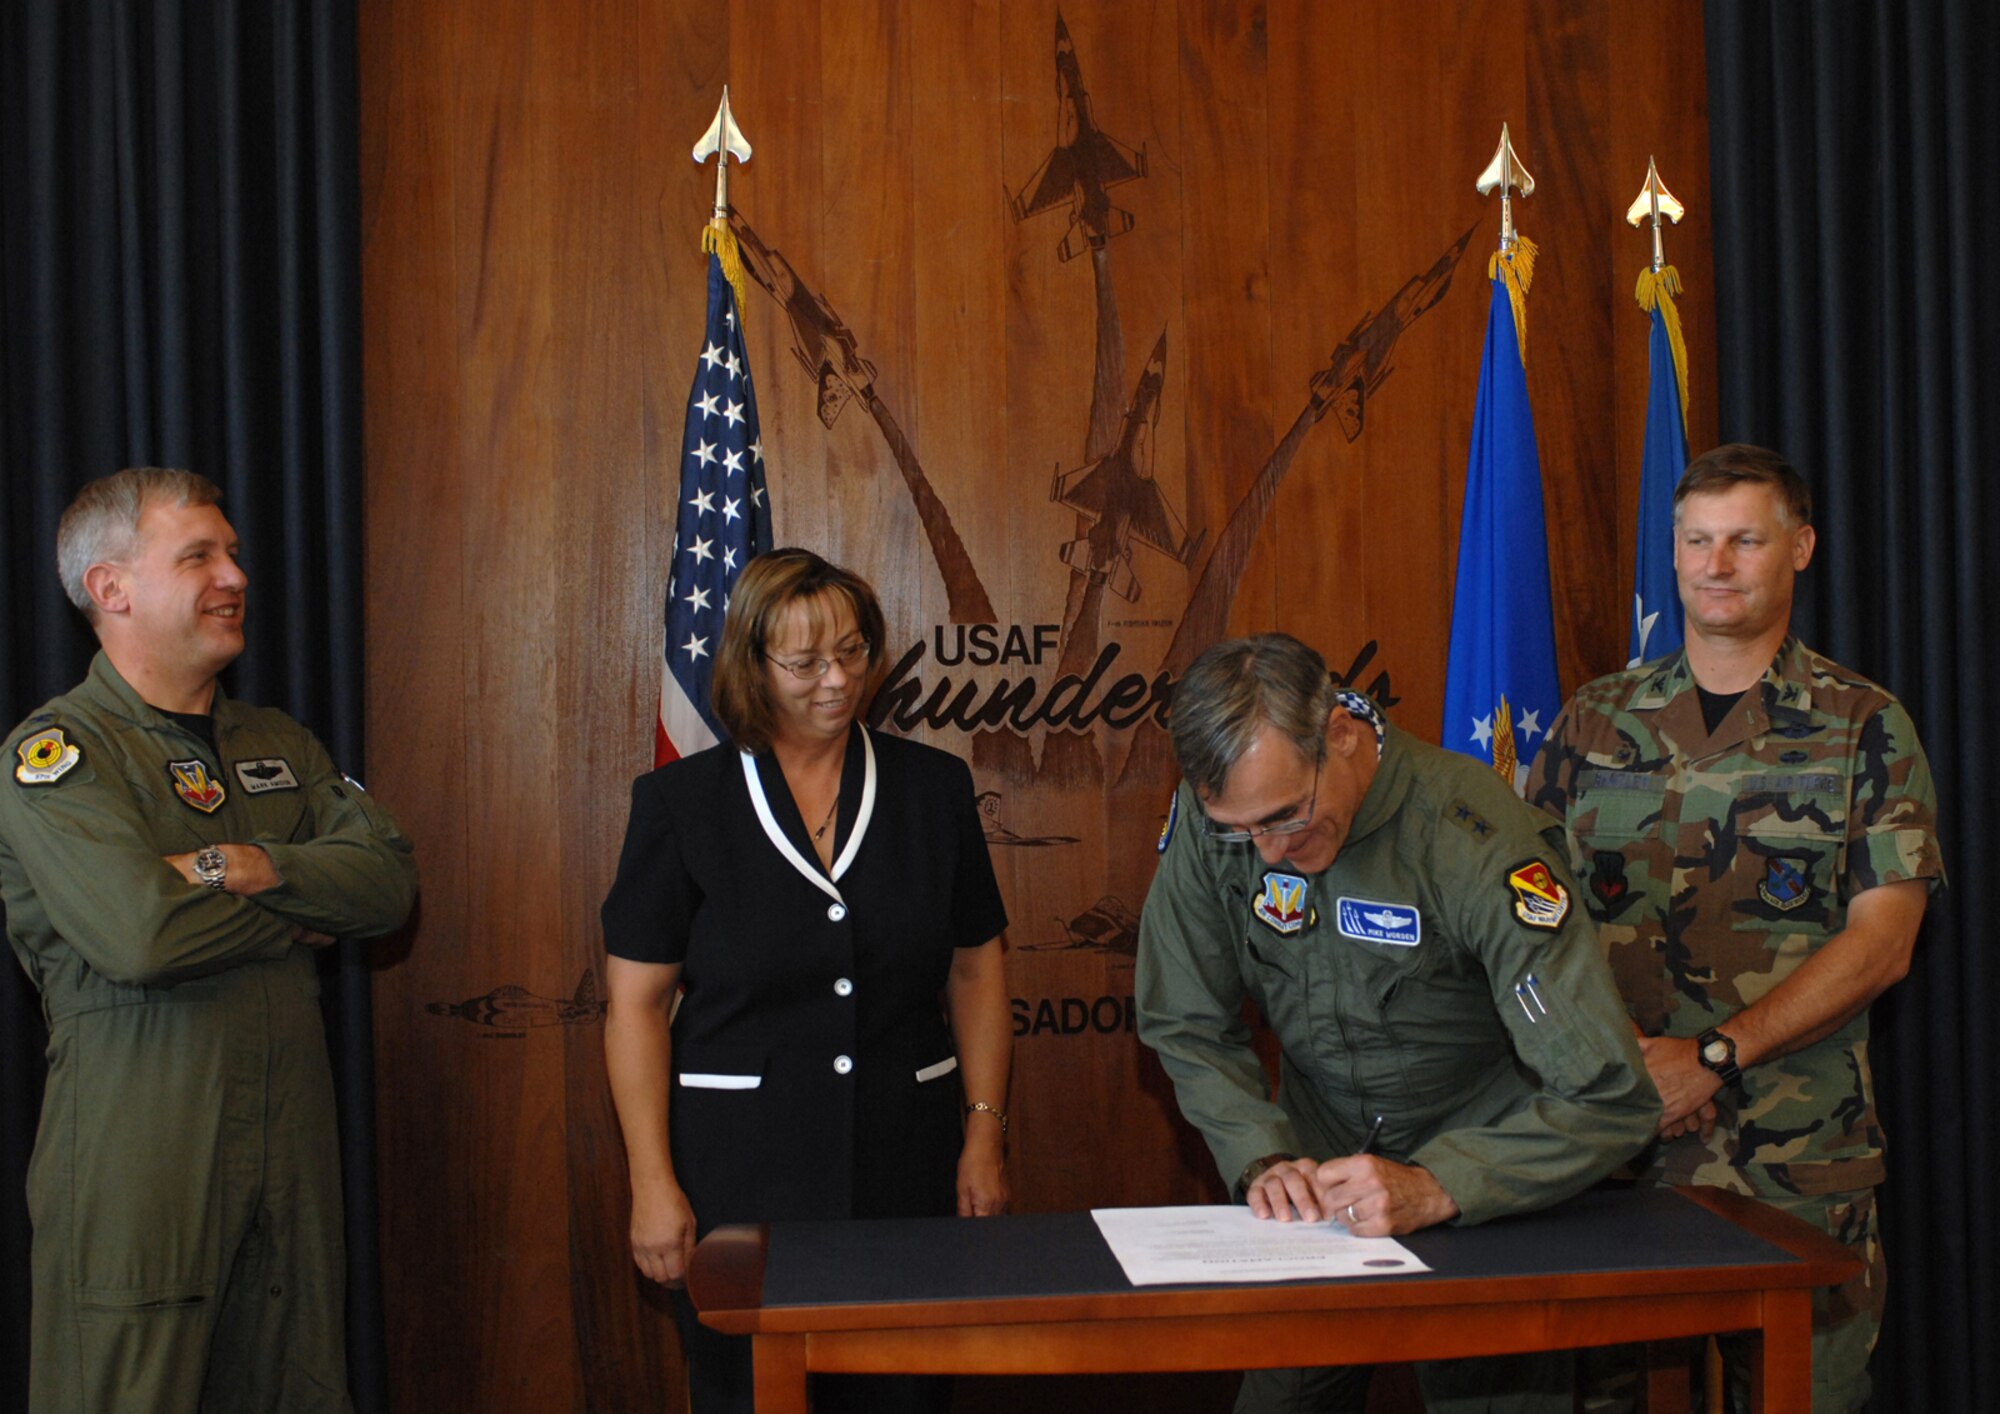 Showing their support of the recently approved 99th Air Base Wing energy policy, (left to right) Col. Mark Amidon, 57th Wing vice commander, Yvonne Gresnick, 98th Range Wing deputy director, Maj. Gen. Mike Worden, U. S. Air Force Warfare Center commander, and Col. Michael Bartley, 99th ABW commander, signed a proclamation affirming their commitment to energy conservation at Nellis and Creech Air Force Bases, as well as the Nevada Test and Training Range, June 12. The energy policy letter and proclamation, along with infrastructure projects and promotion of individual responsibility, make up the three-pronged strategy aimed at reducing energy consumption.